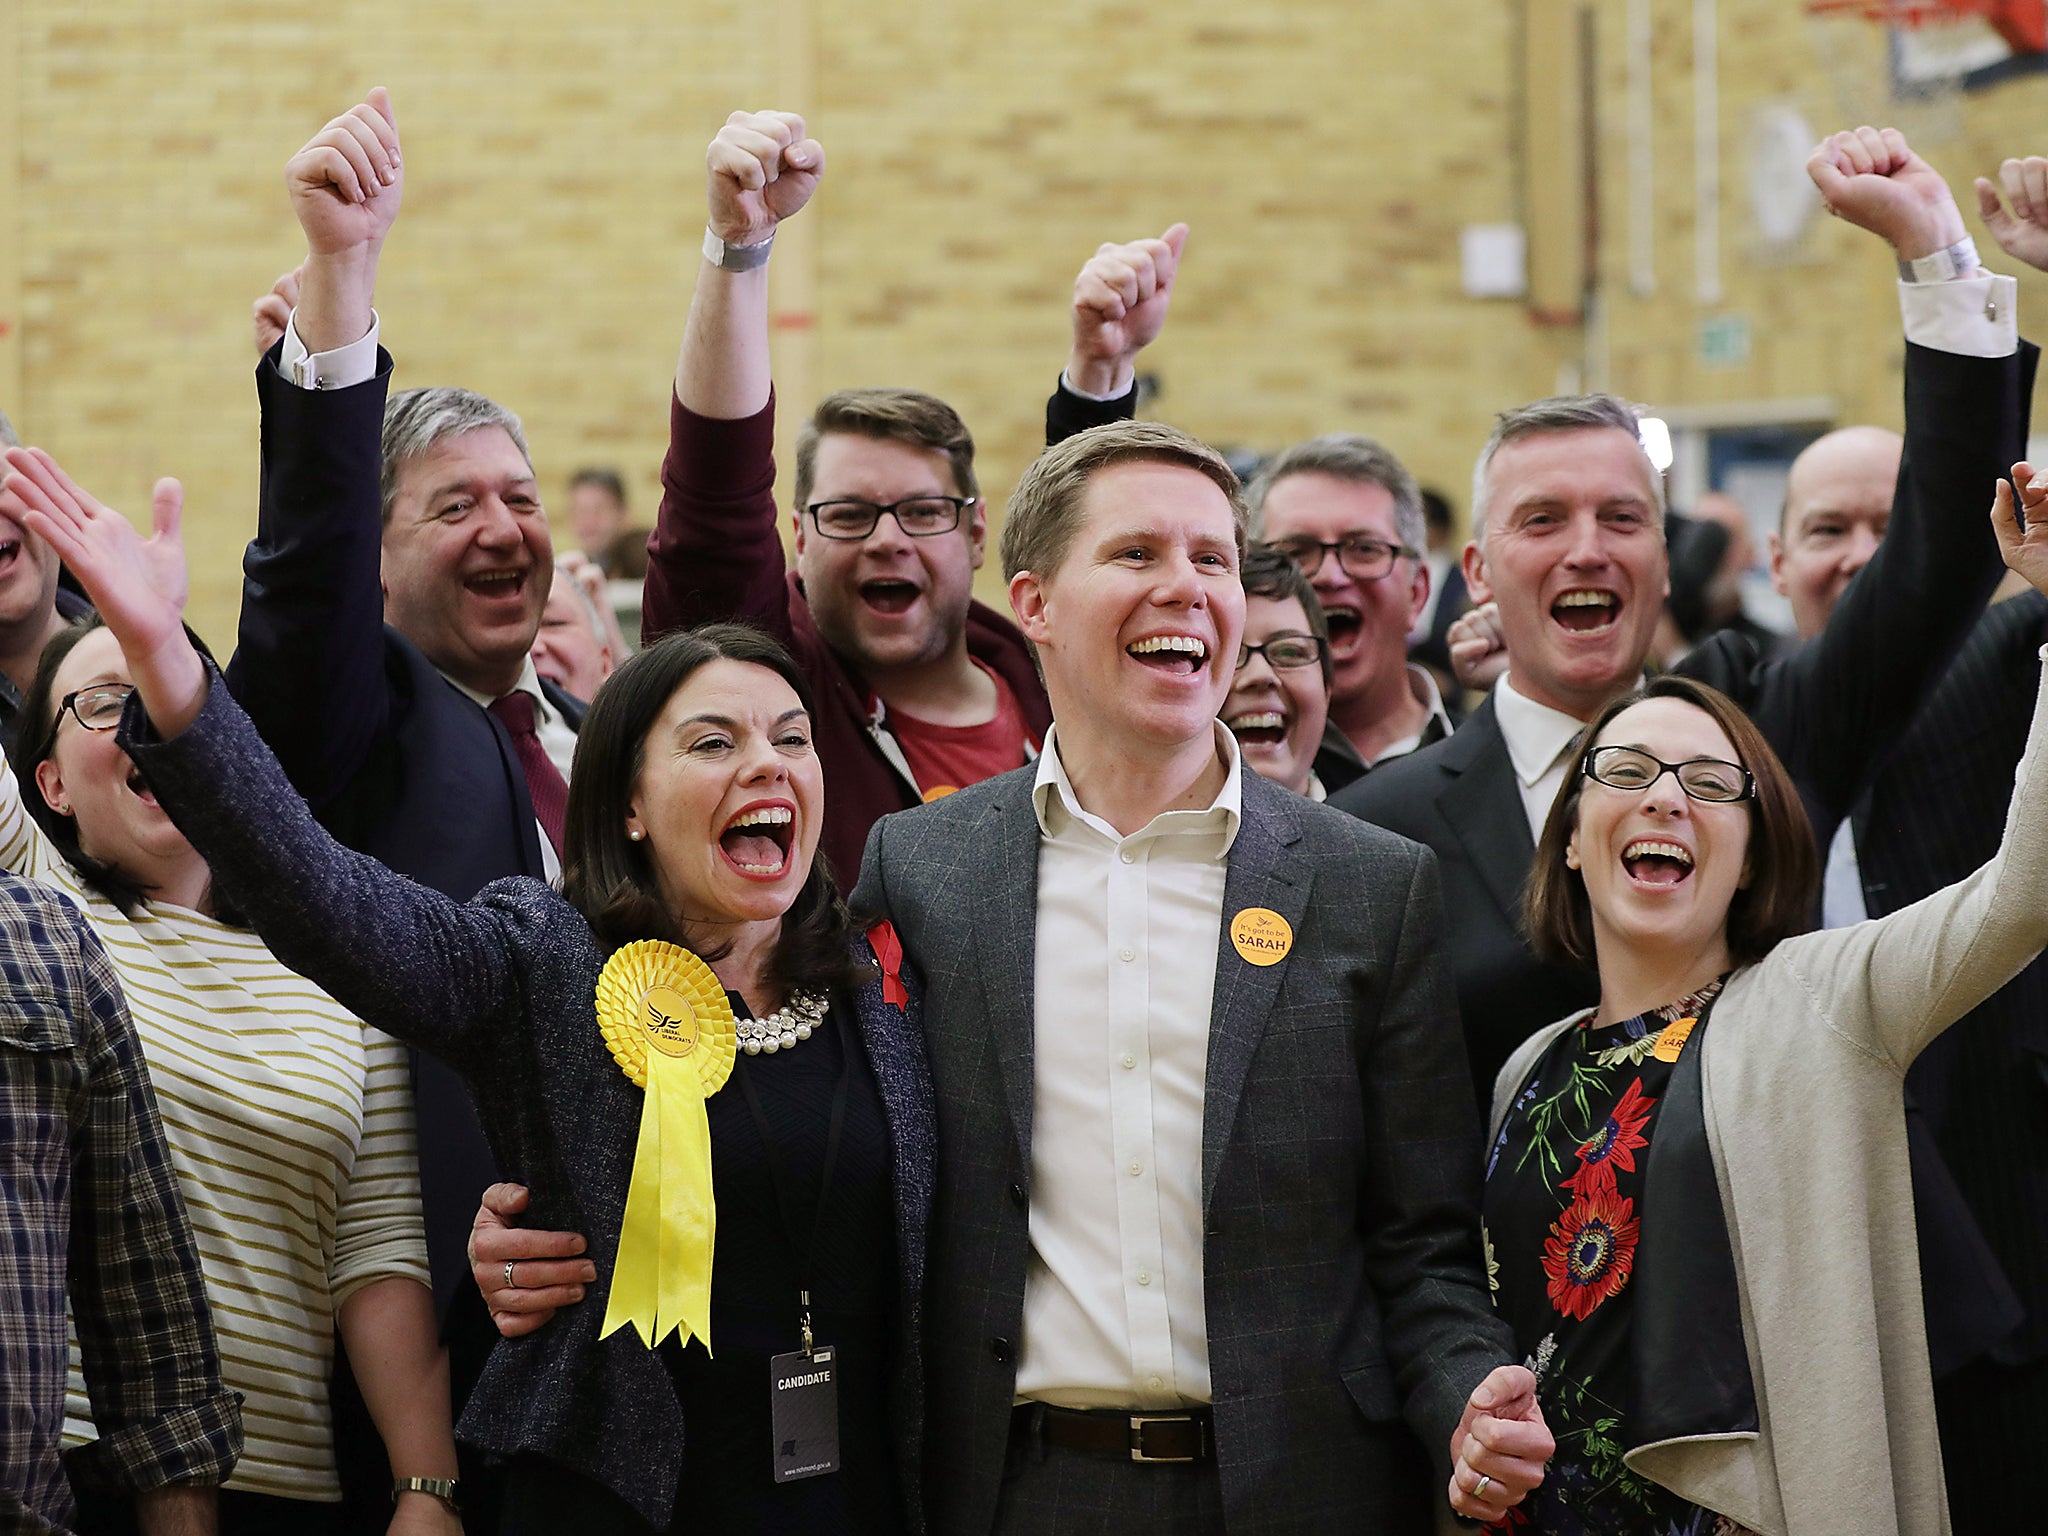 Sarah Olney's Richmond Park by-election victory has seen the party jump four points from 10 to 14